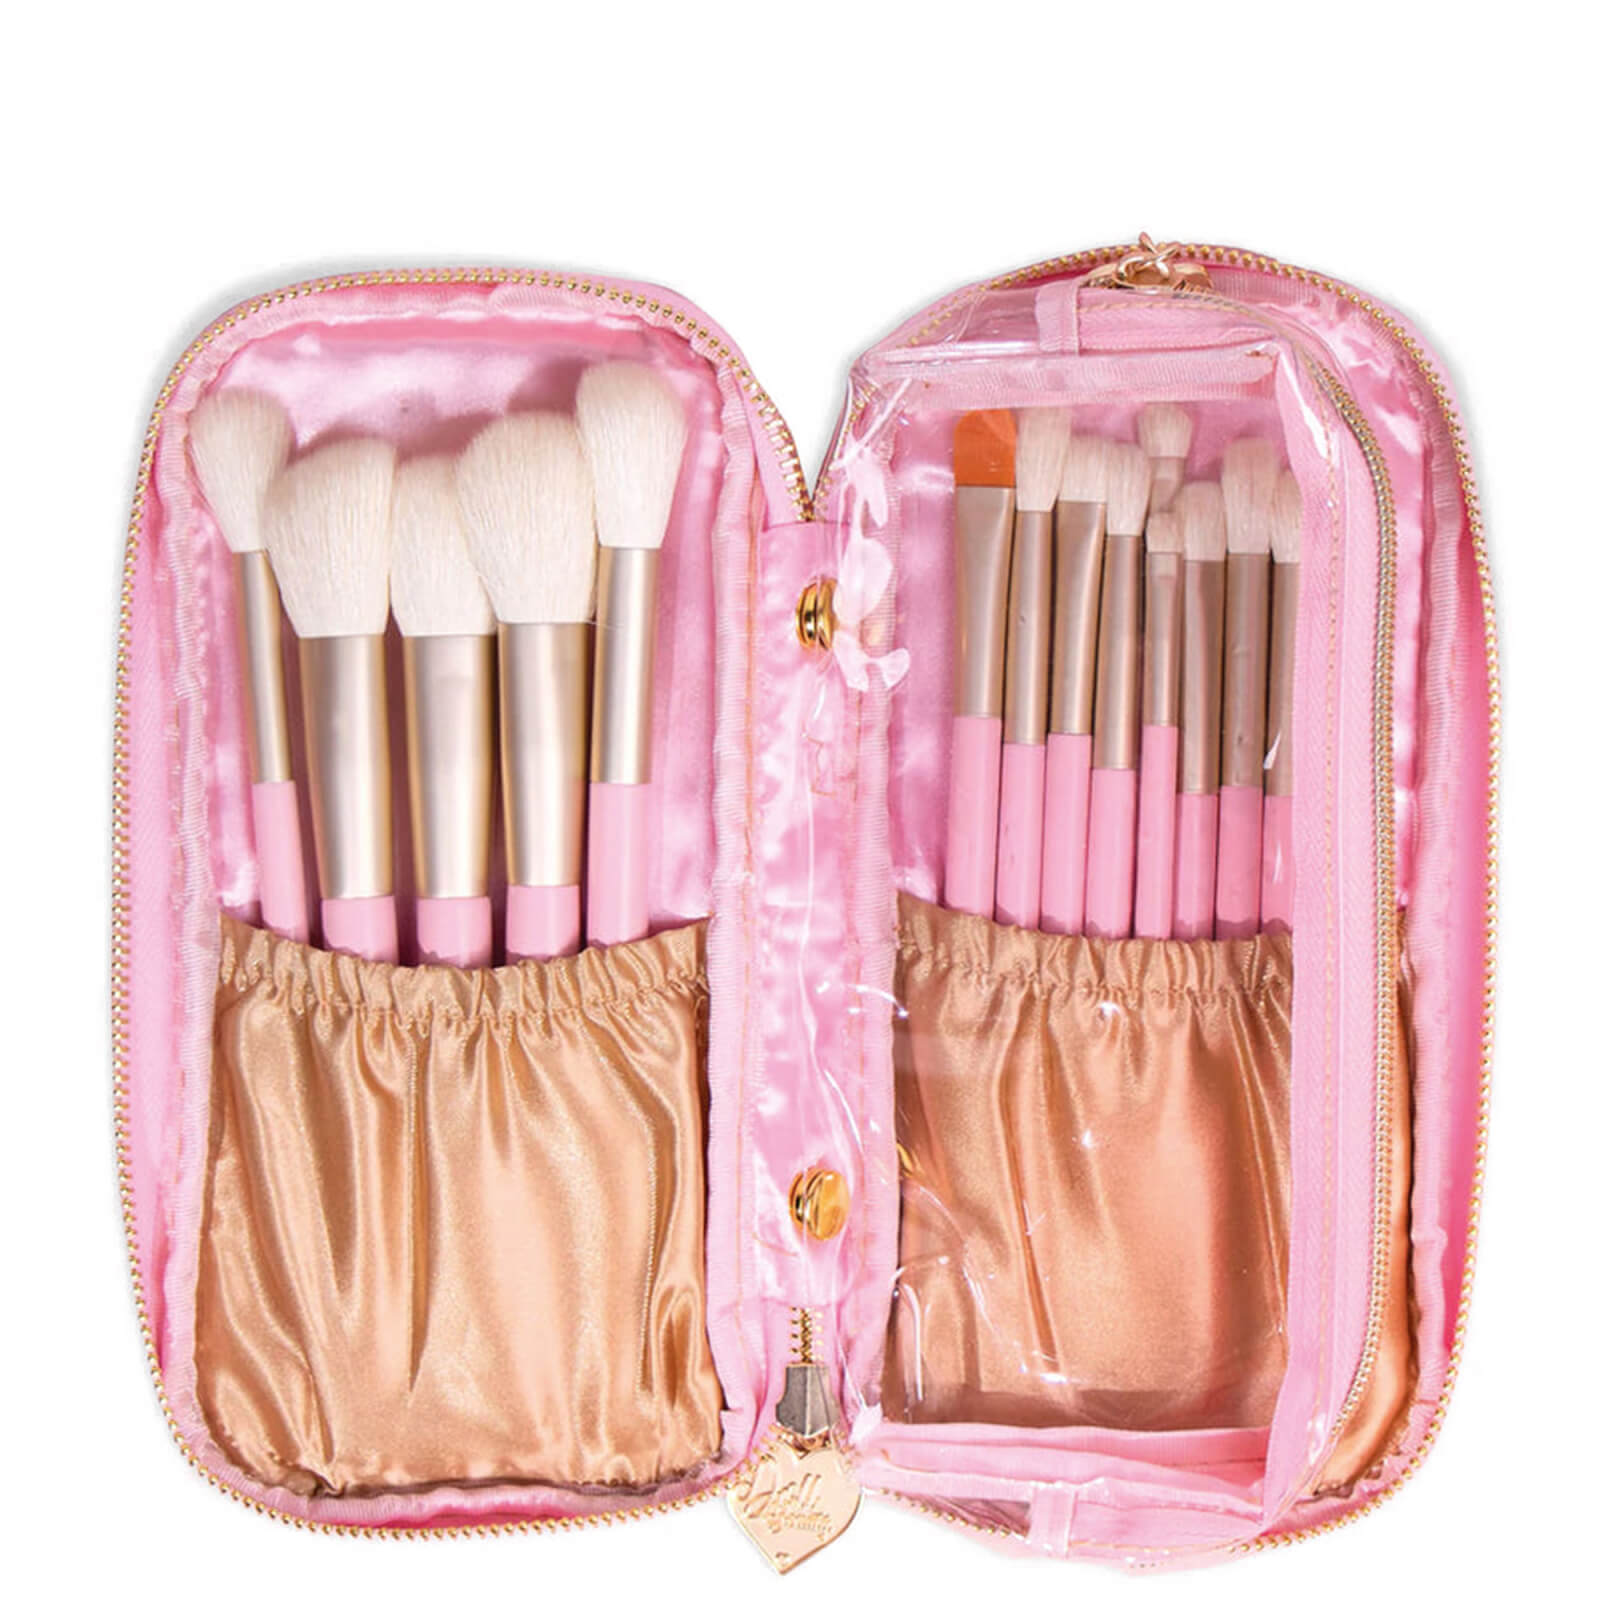 Doll Beauty 15 Piece Synthetic Goat Hair Brush Set In Pink